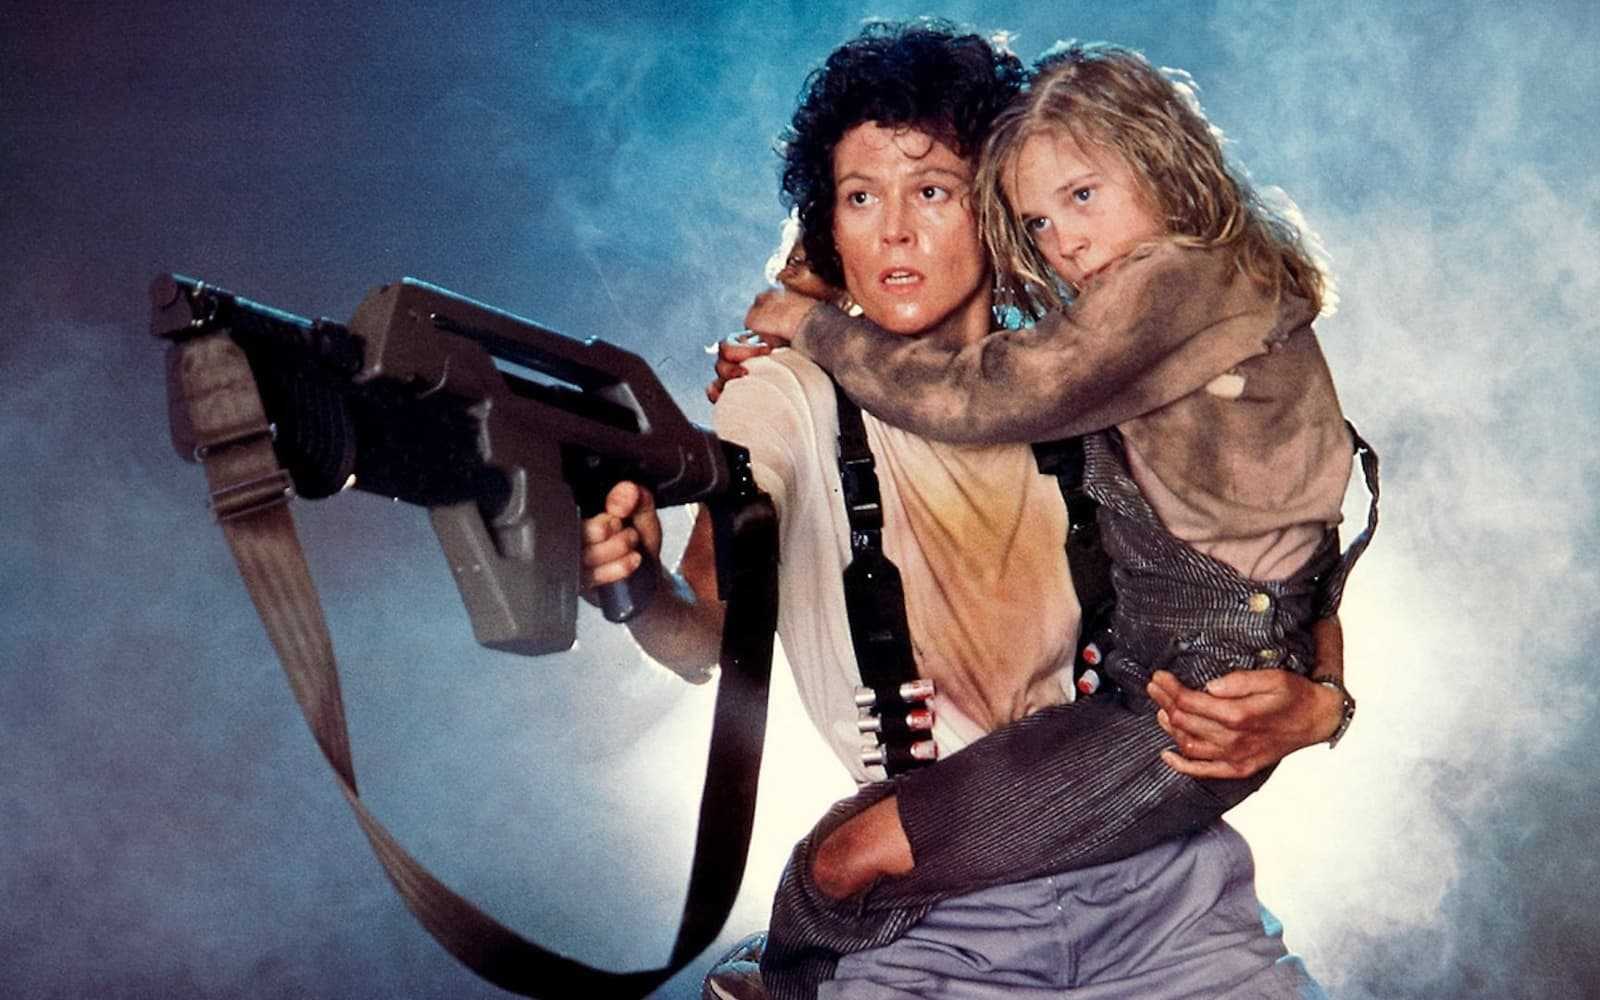 Sigourney Weaver is carrying a big gun and a young girl in this still from Aliens